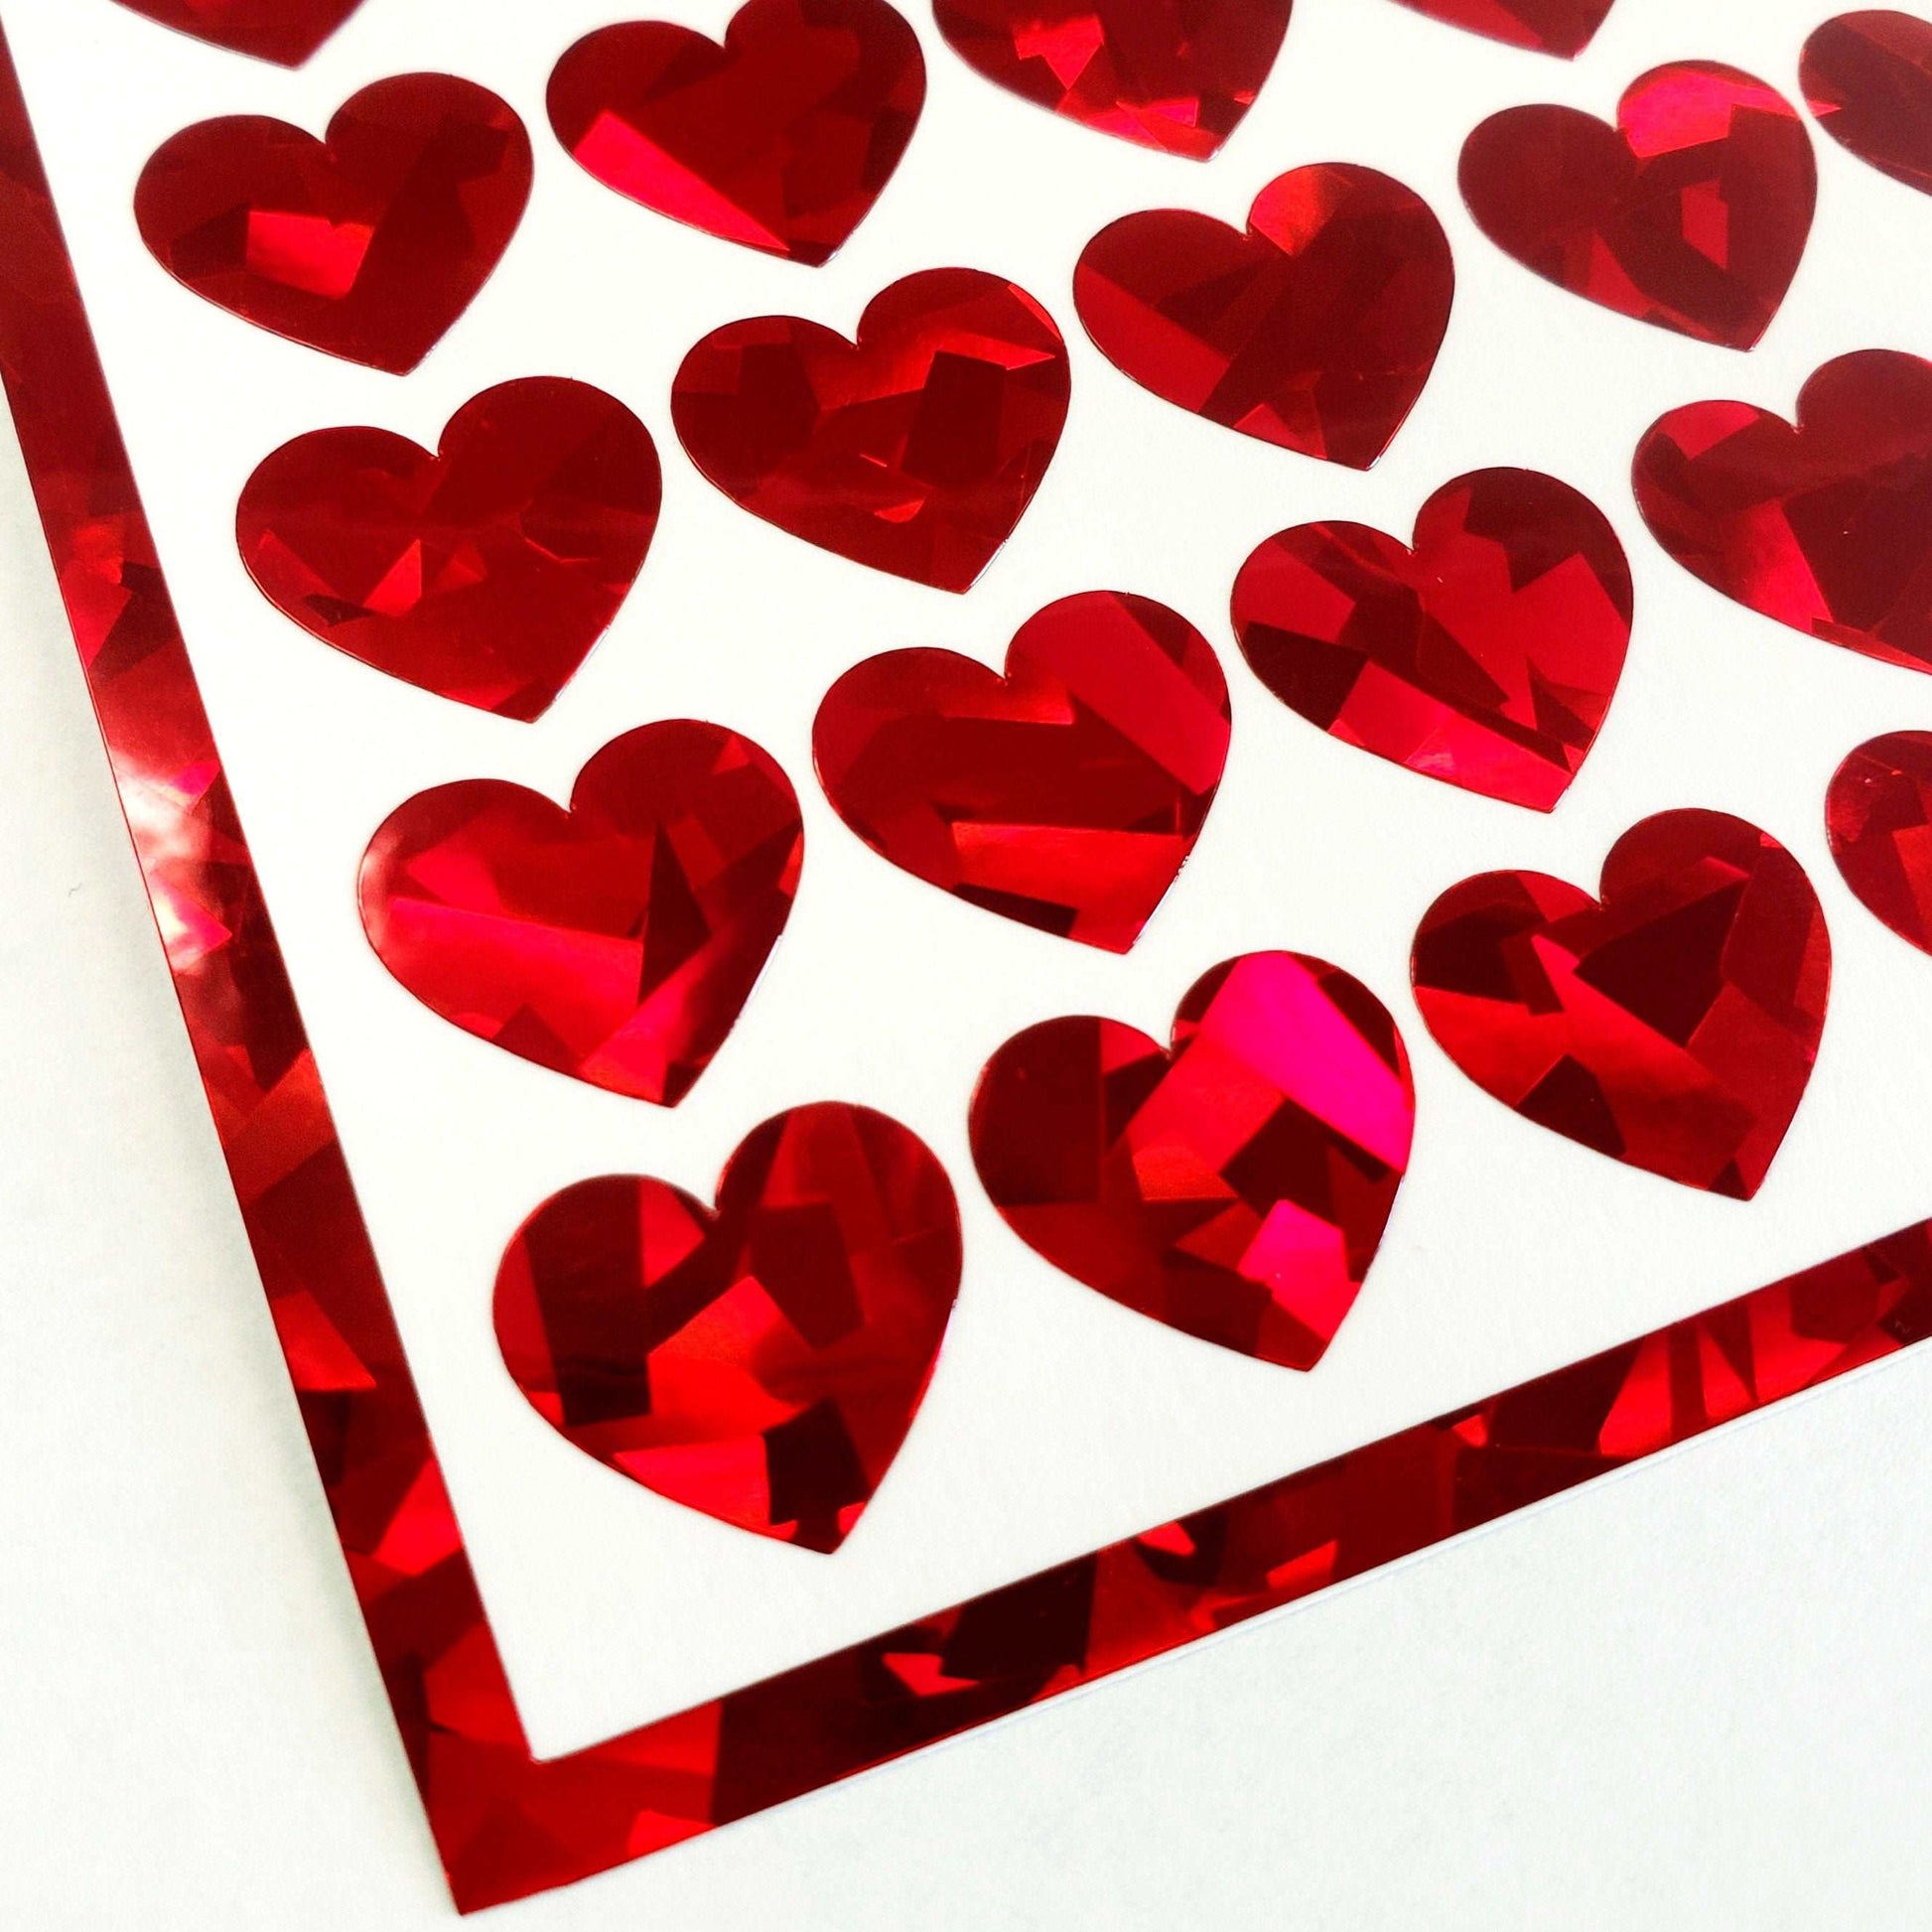 Red Hearts Sticker Sheet. Set of 104 sparkly vinyl heart decals for planners, notebooks, journals, charts and crafts. Red half inch hearts.